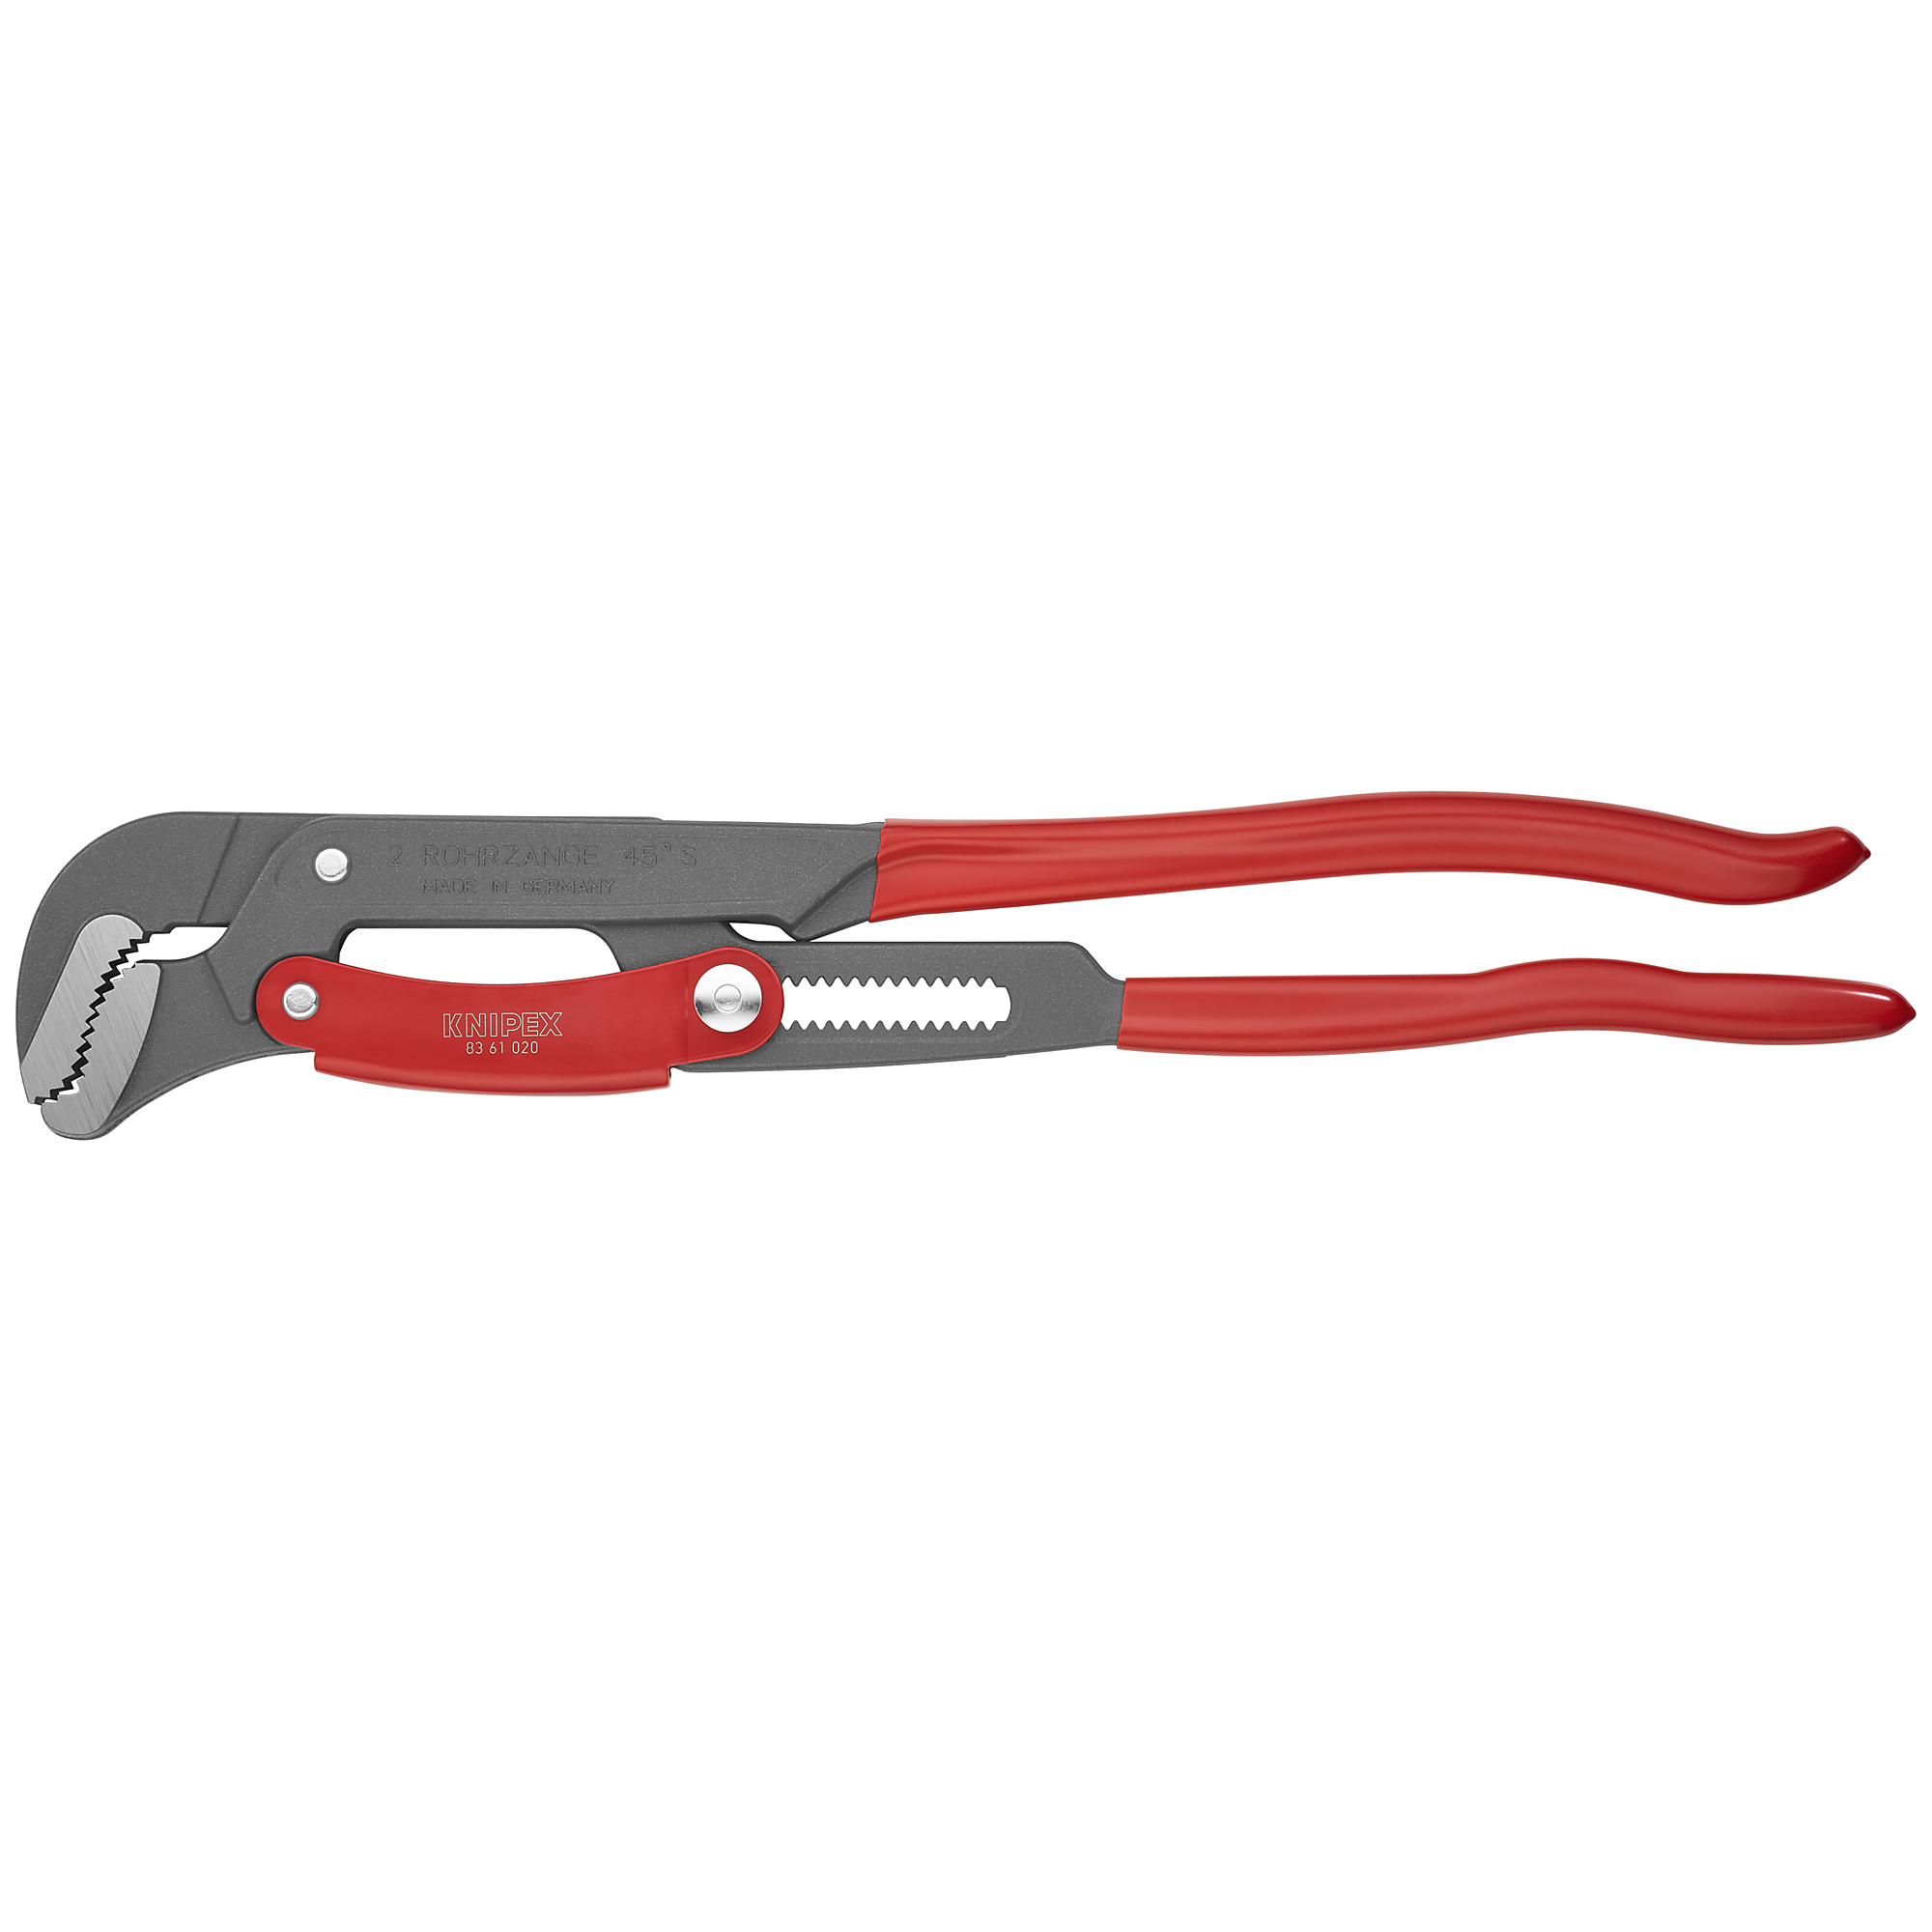 KNIPEX, Rapid Adjust Swedish Pipe Wrench-S-Type, 22.5Inch, Pieces (qty.) 1 Material Steel, Jaw Capacity 2.75 in, Model 83 61 020